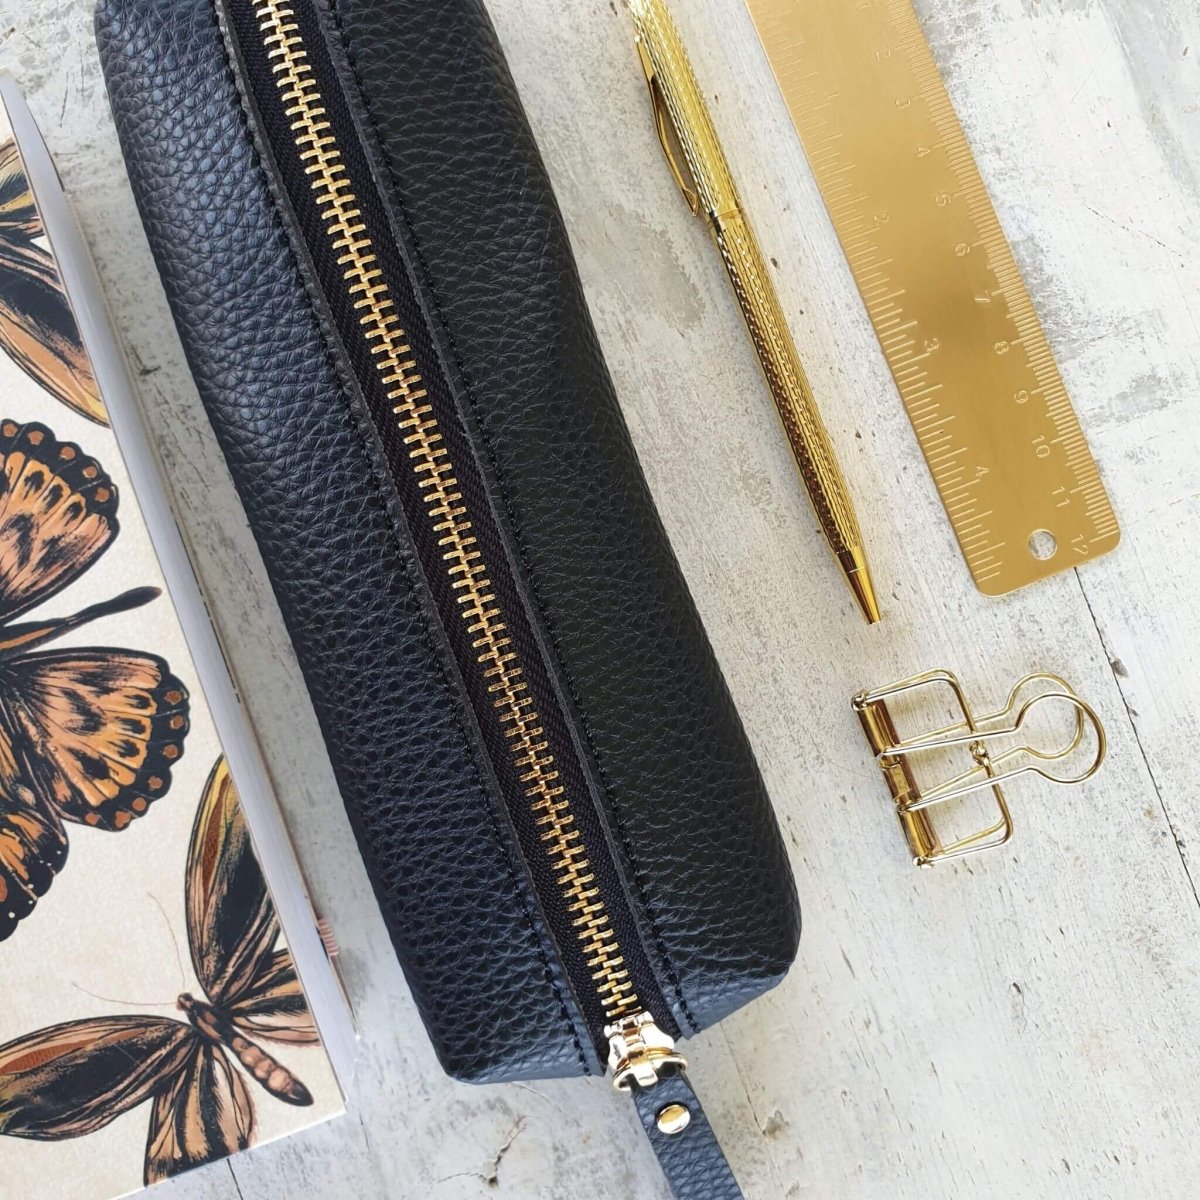 small black pencil case nest to gold pen and ruler and notebook